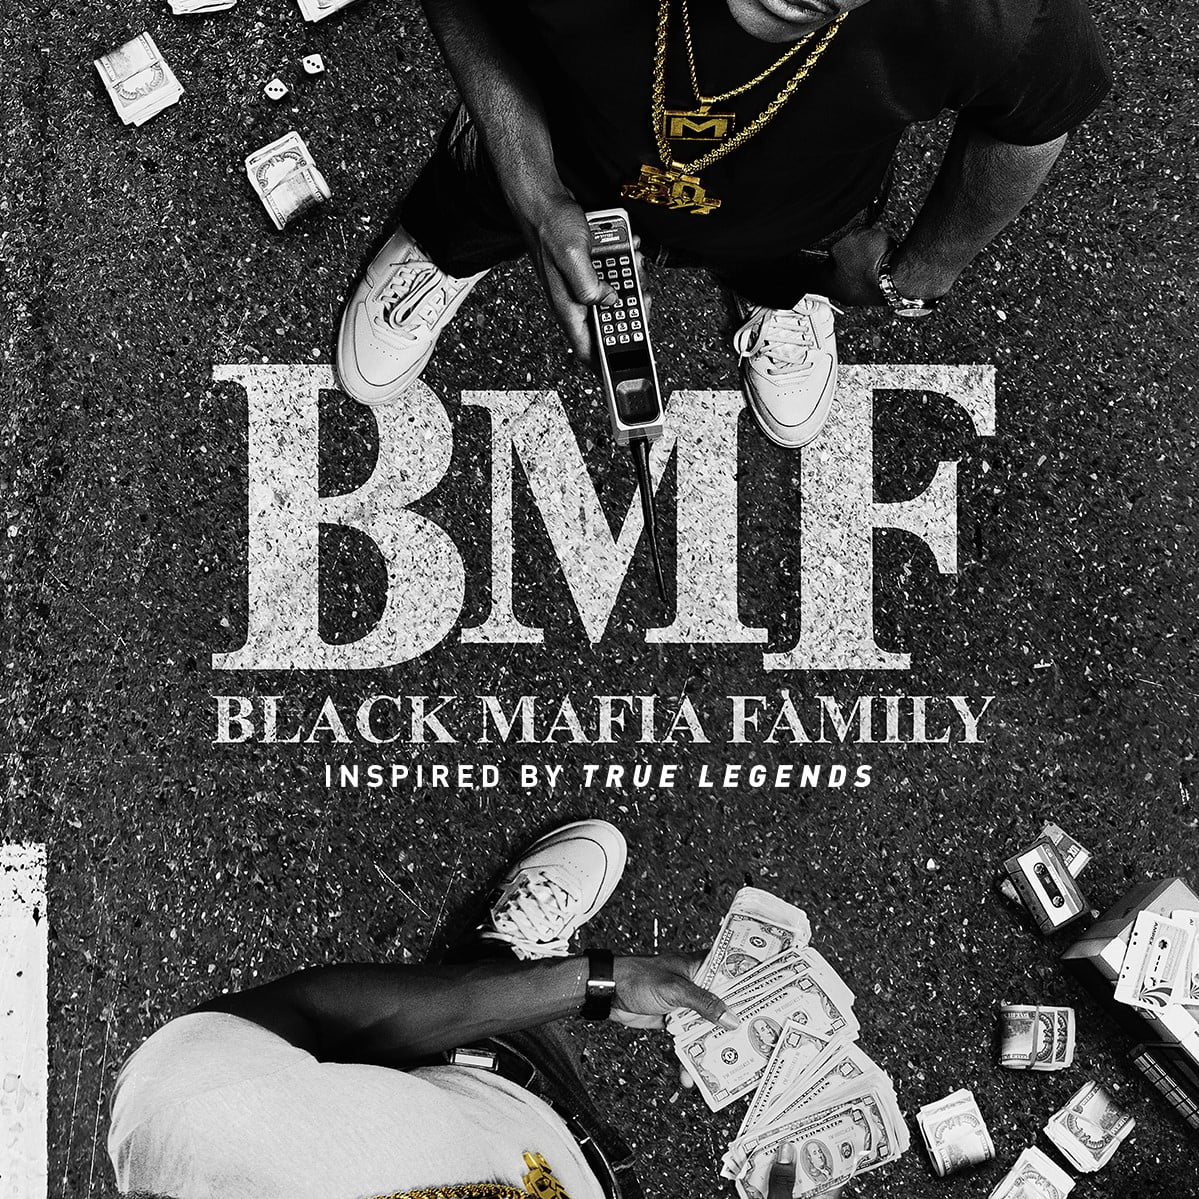 BMF poster via ONE35 Agency for use by 360 Magazine